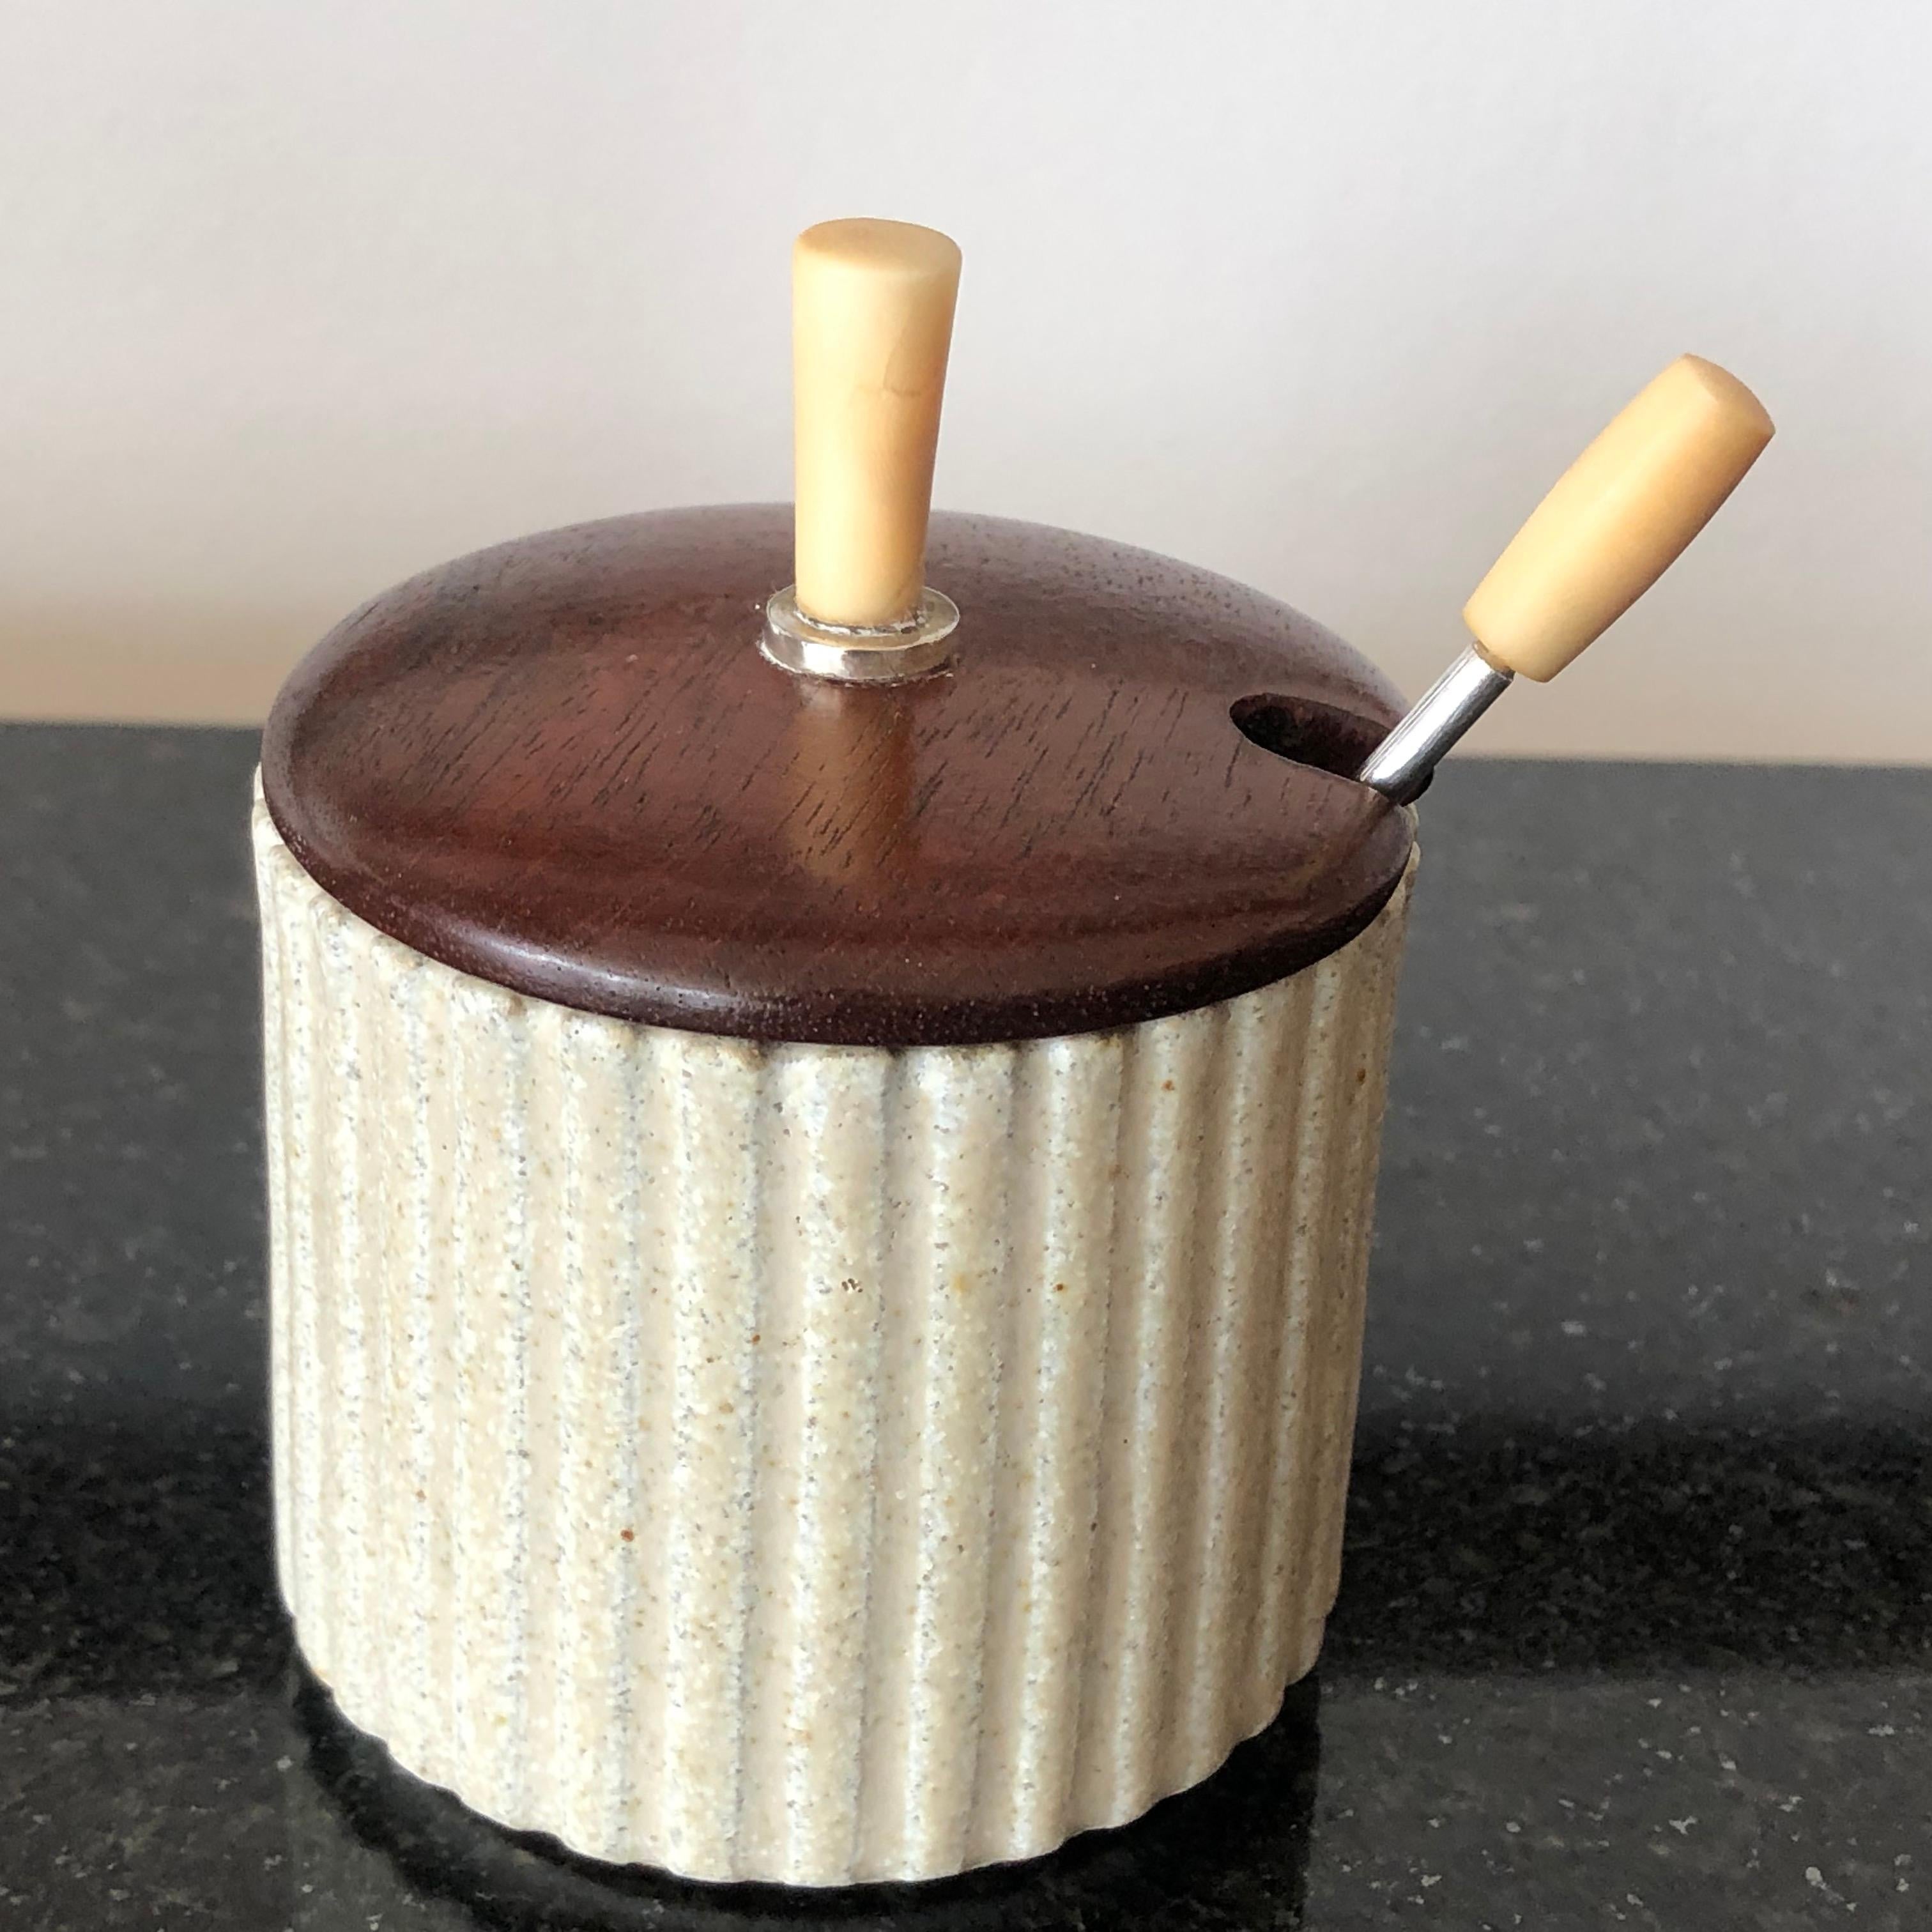 Mid-Century Modern Danish Art Pottery Jam Pot with Teak Lid and Silver Spoon by Arne Bang